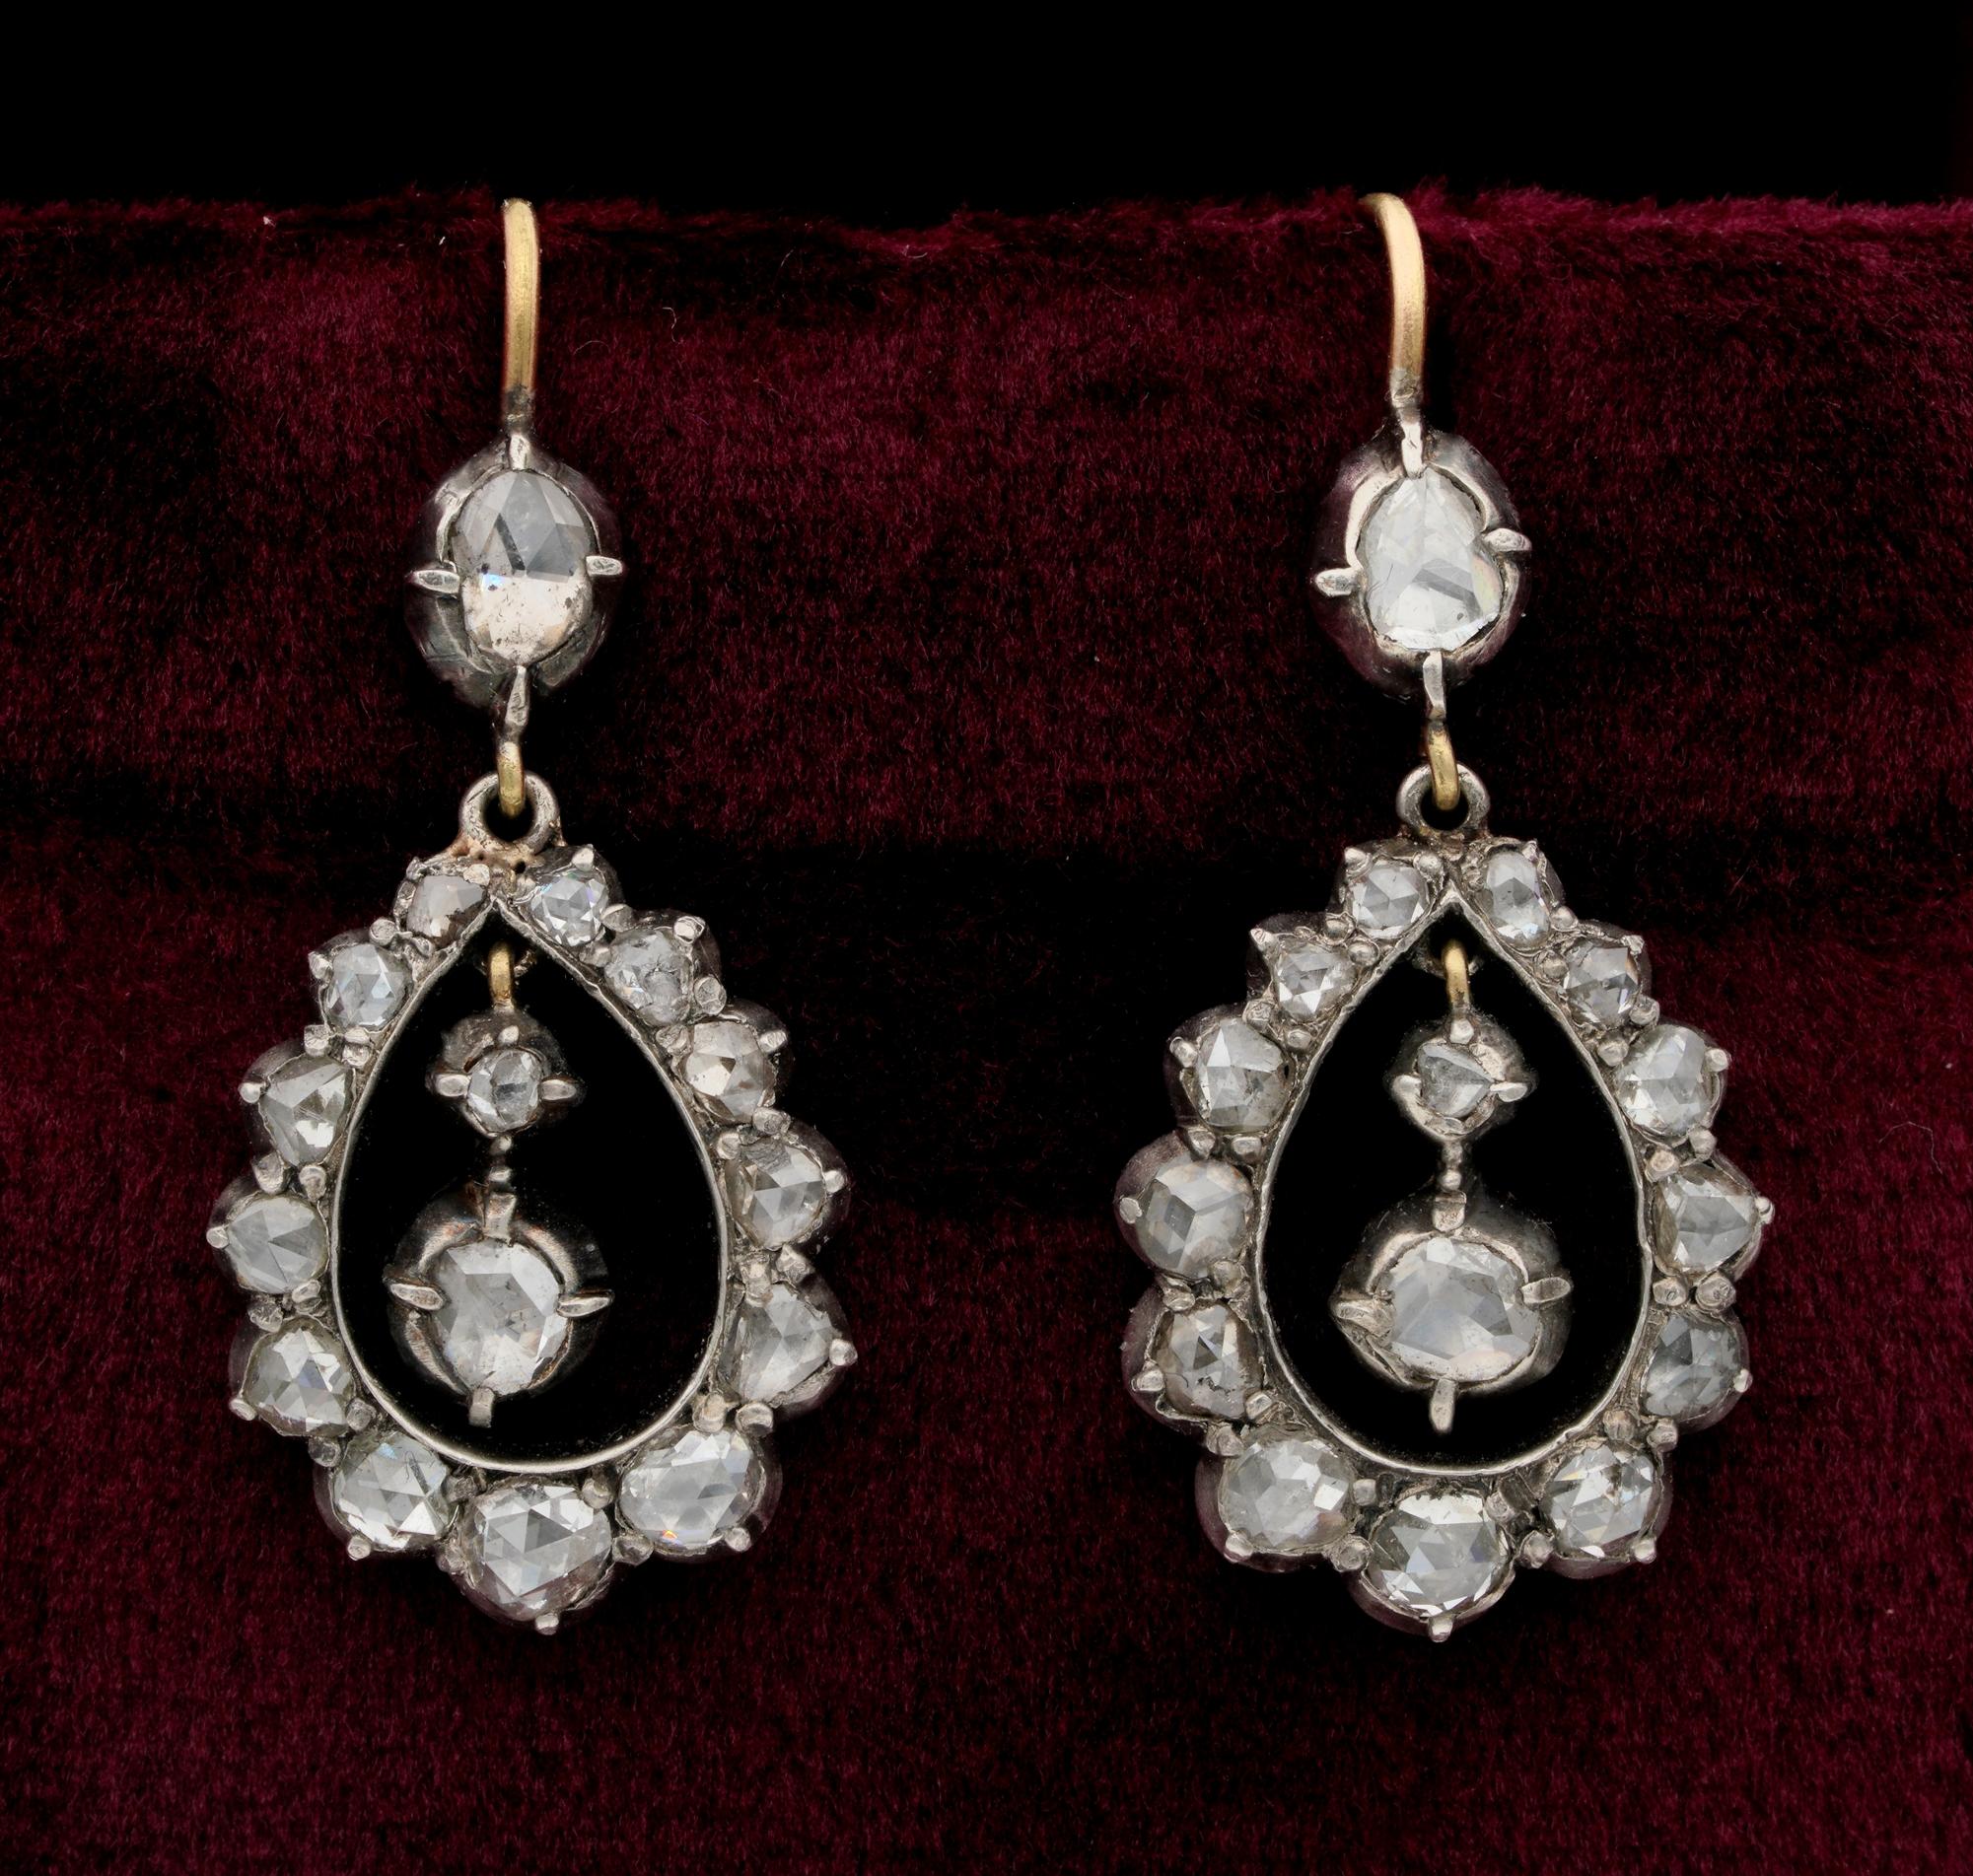 Georgian Treasure

Beautiful Georgian period Diamond drop earrings of lovely design
Close back, hand crafted of solid 15 KT gold topped by silver – tested – 1790/1810 ca
English origin
Articulate to swing on ears attracting and catching the light at